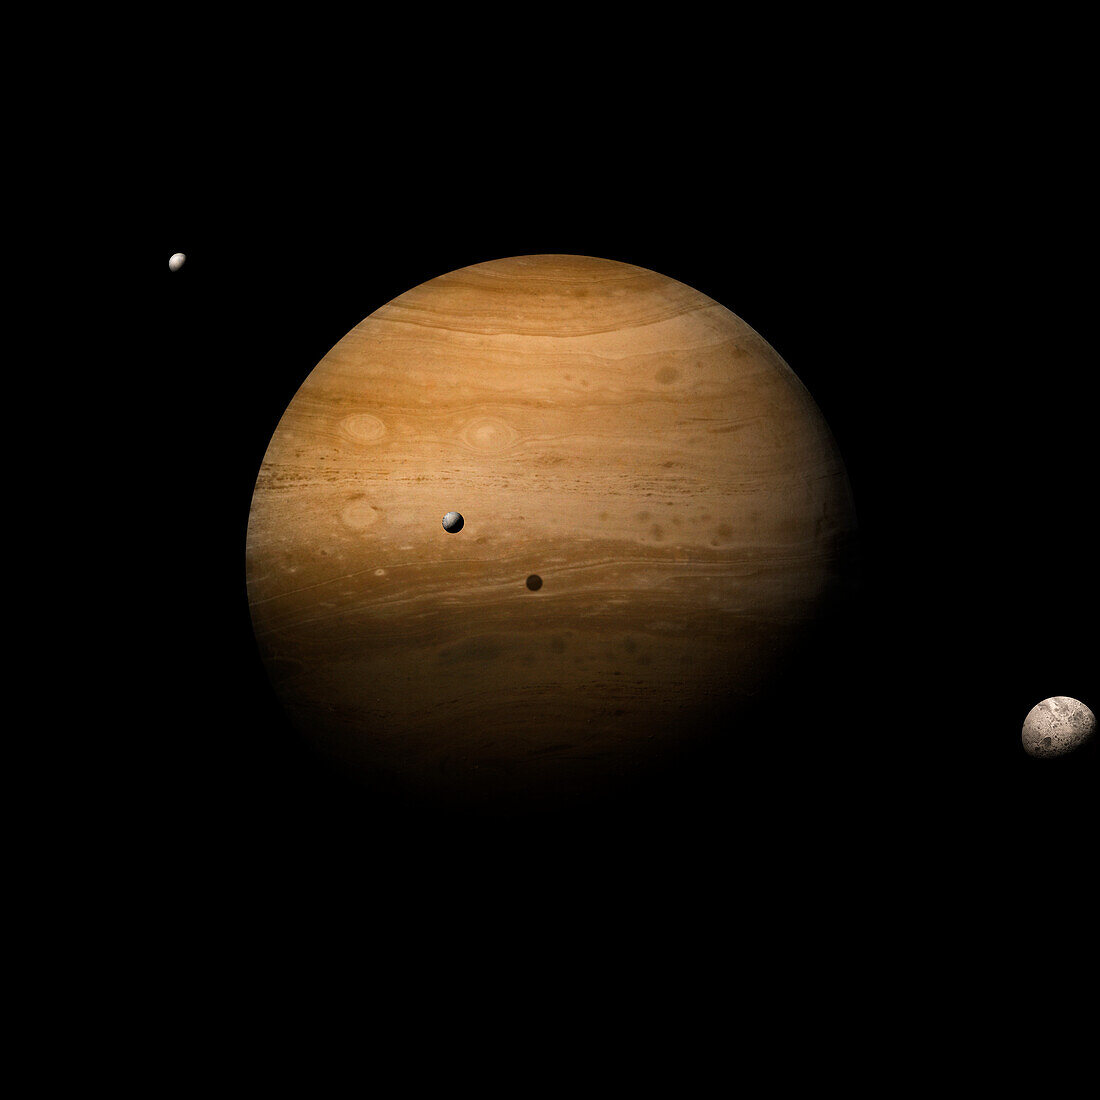 Gas giant exoplanet with three moons, composite image